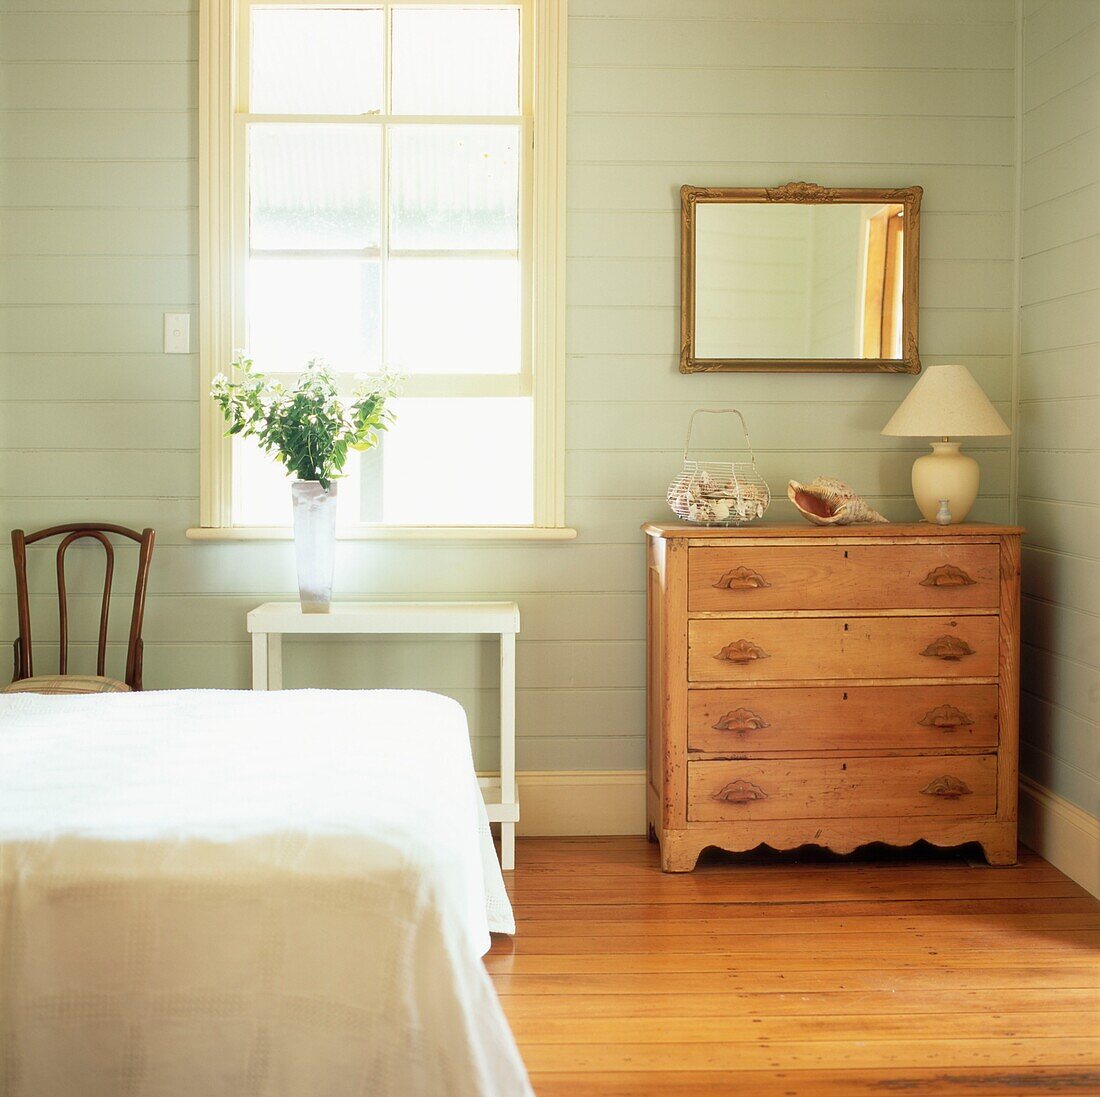 Painted wood panelled bedroom with furniture